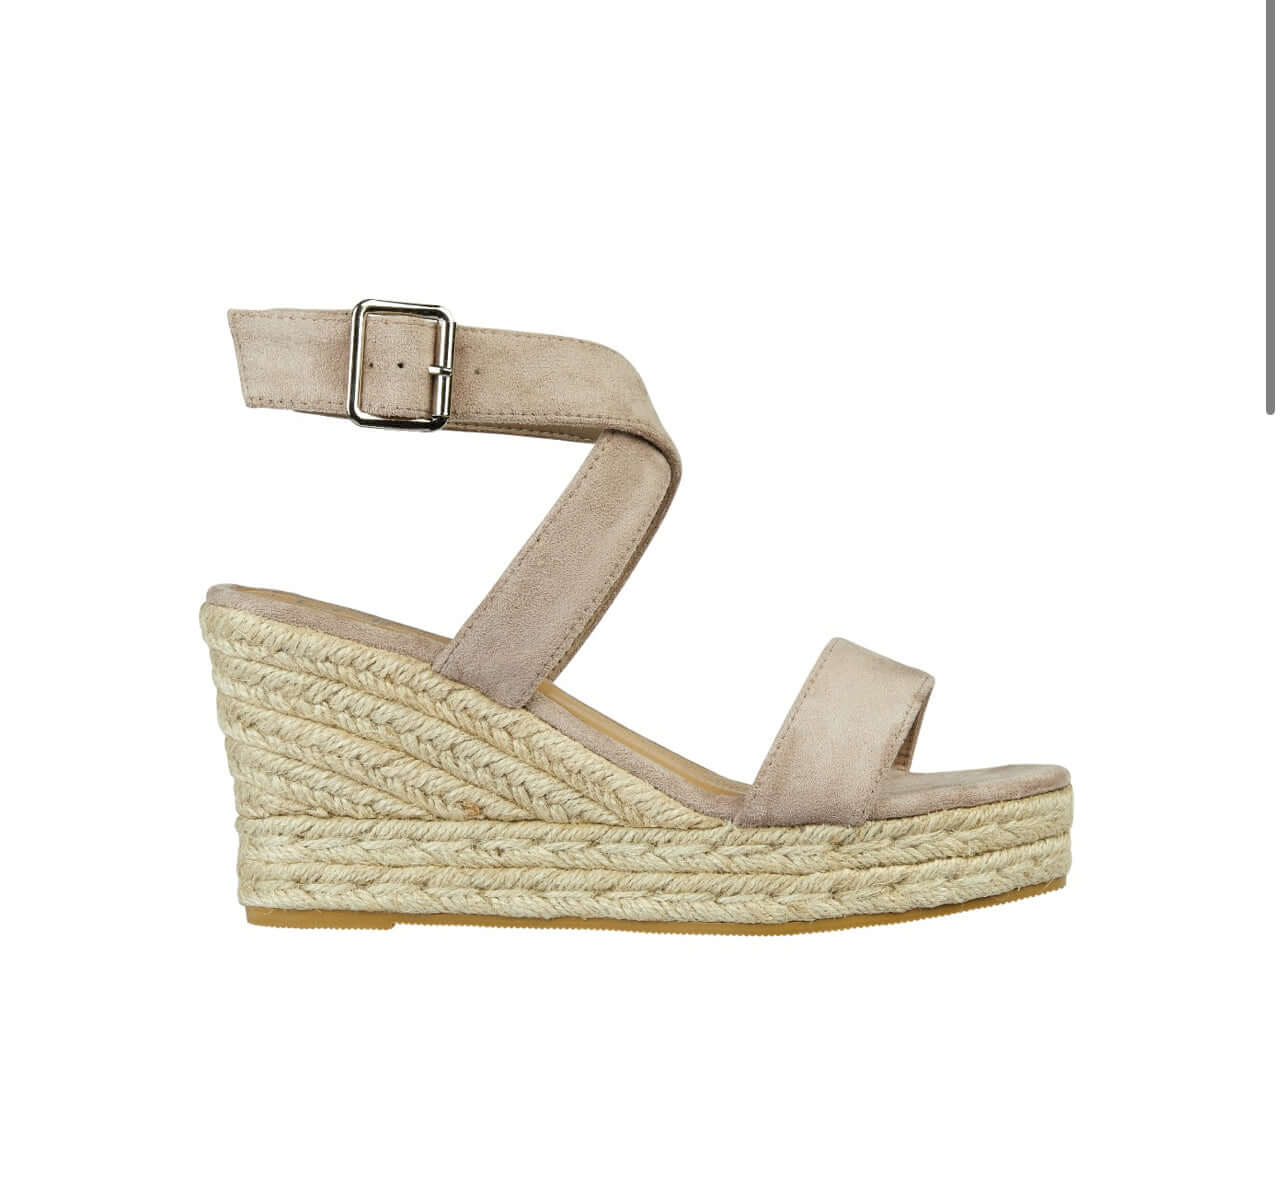 Cipriani Ladies Crossover Ankle Wedge Sandal - Sand